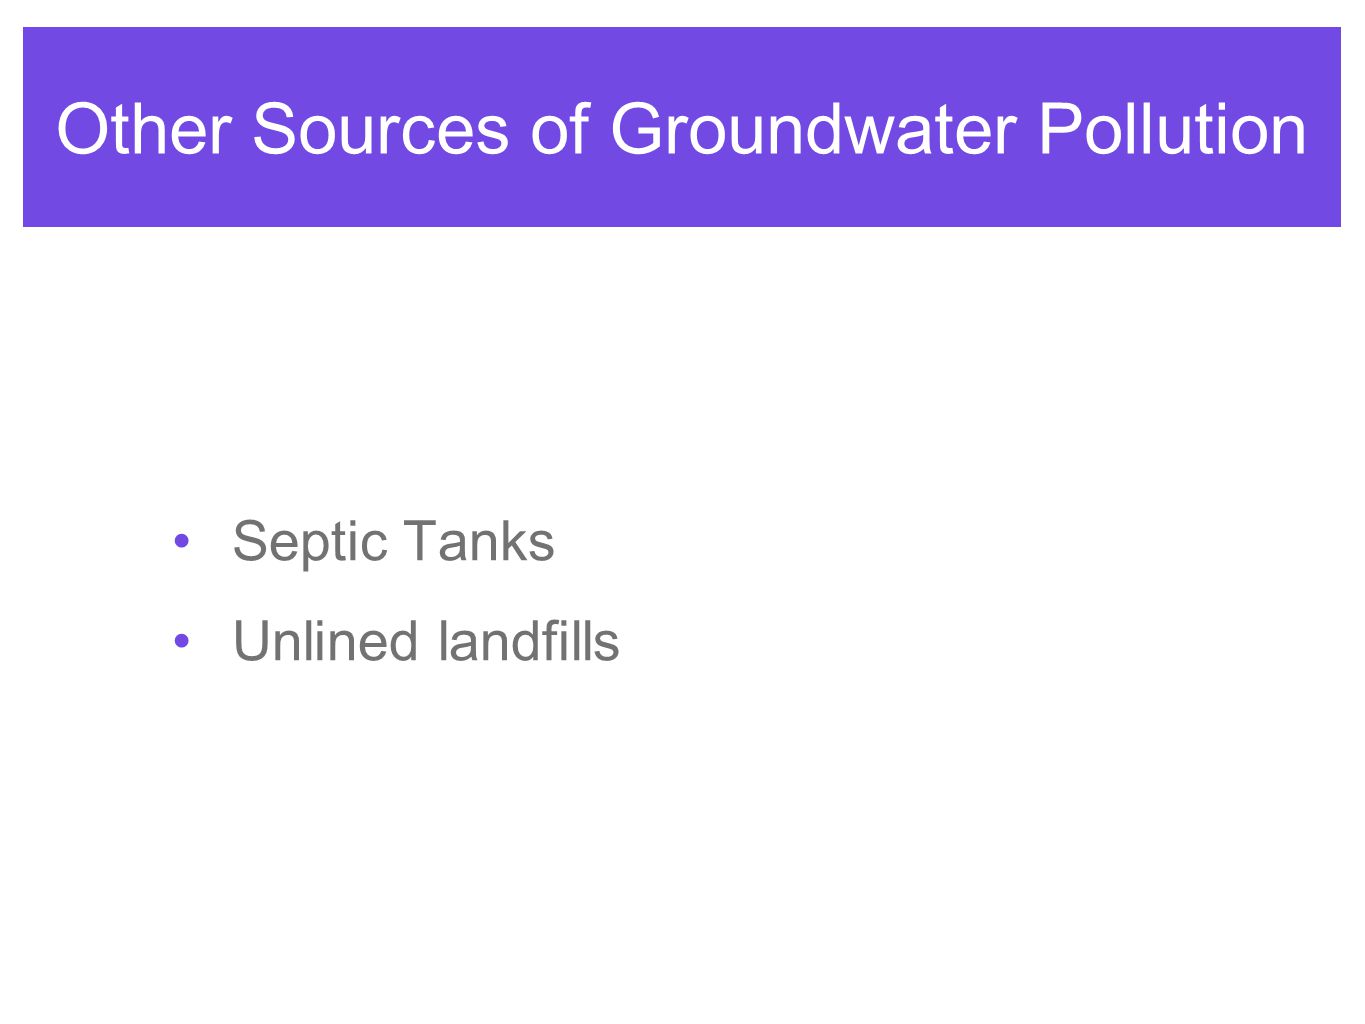 Other Sources of Groundwater Pollution